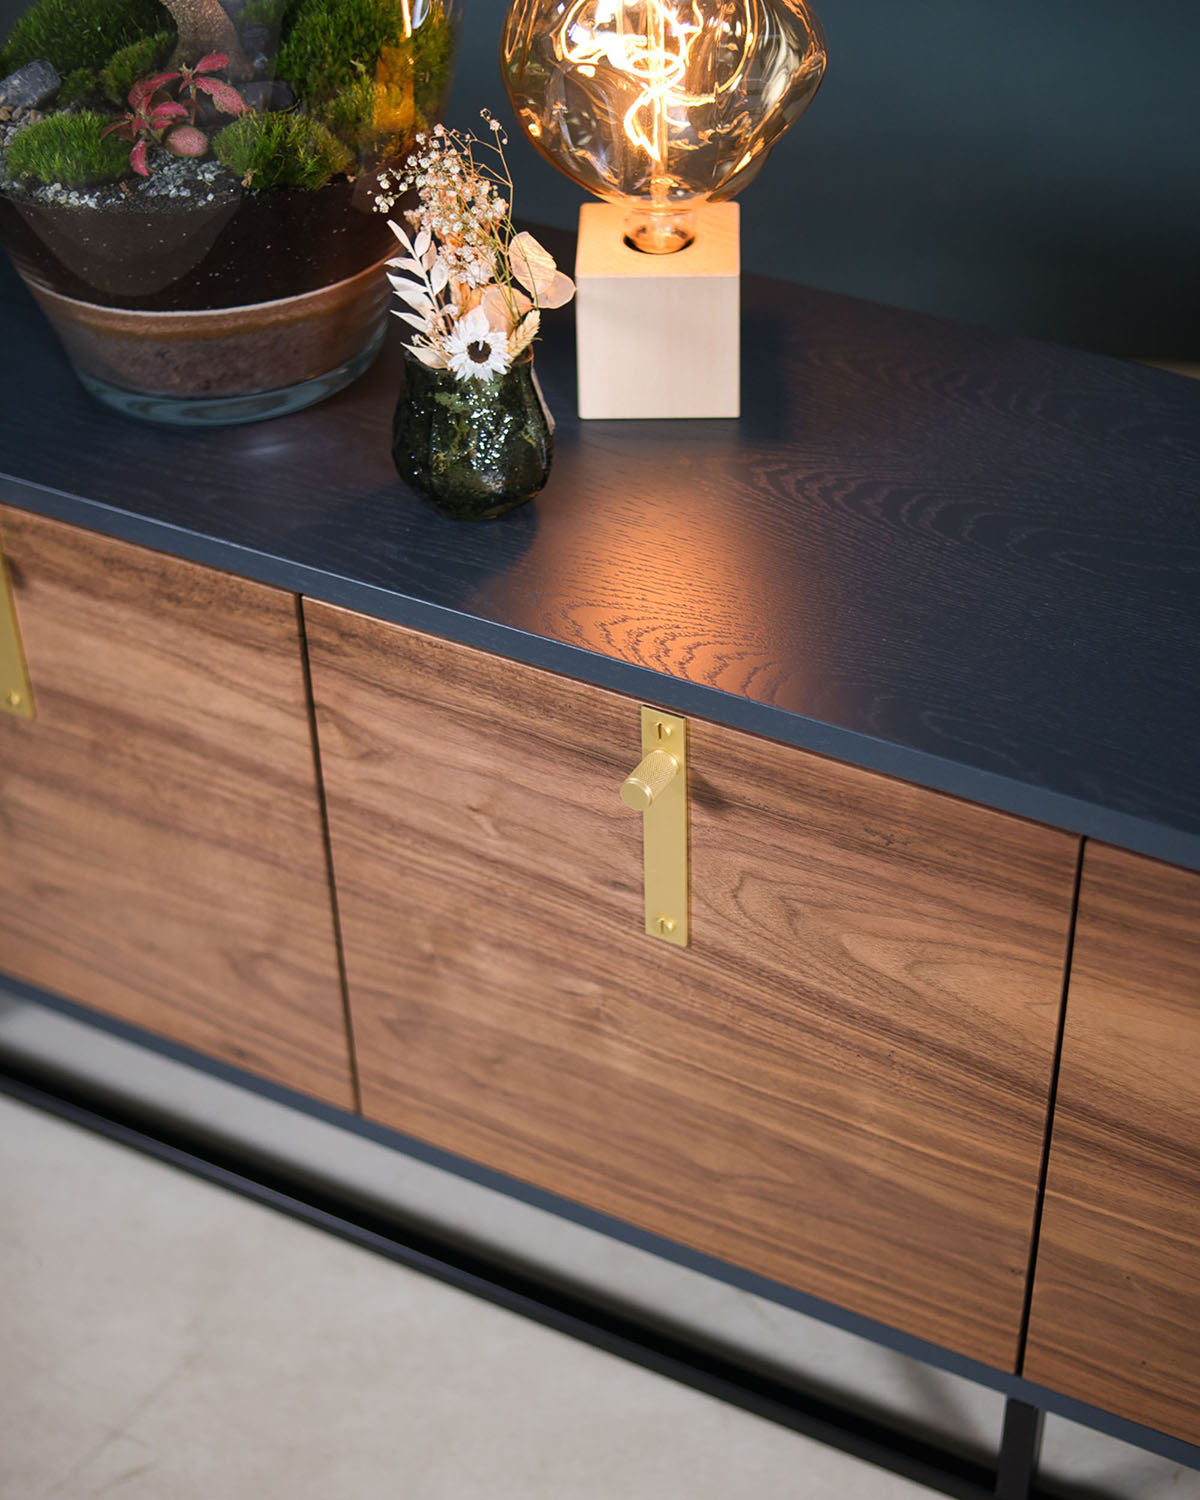 An image of the Walnut TV Stand, Nea product available from Koda Studios